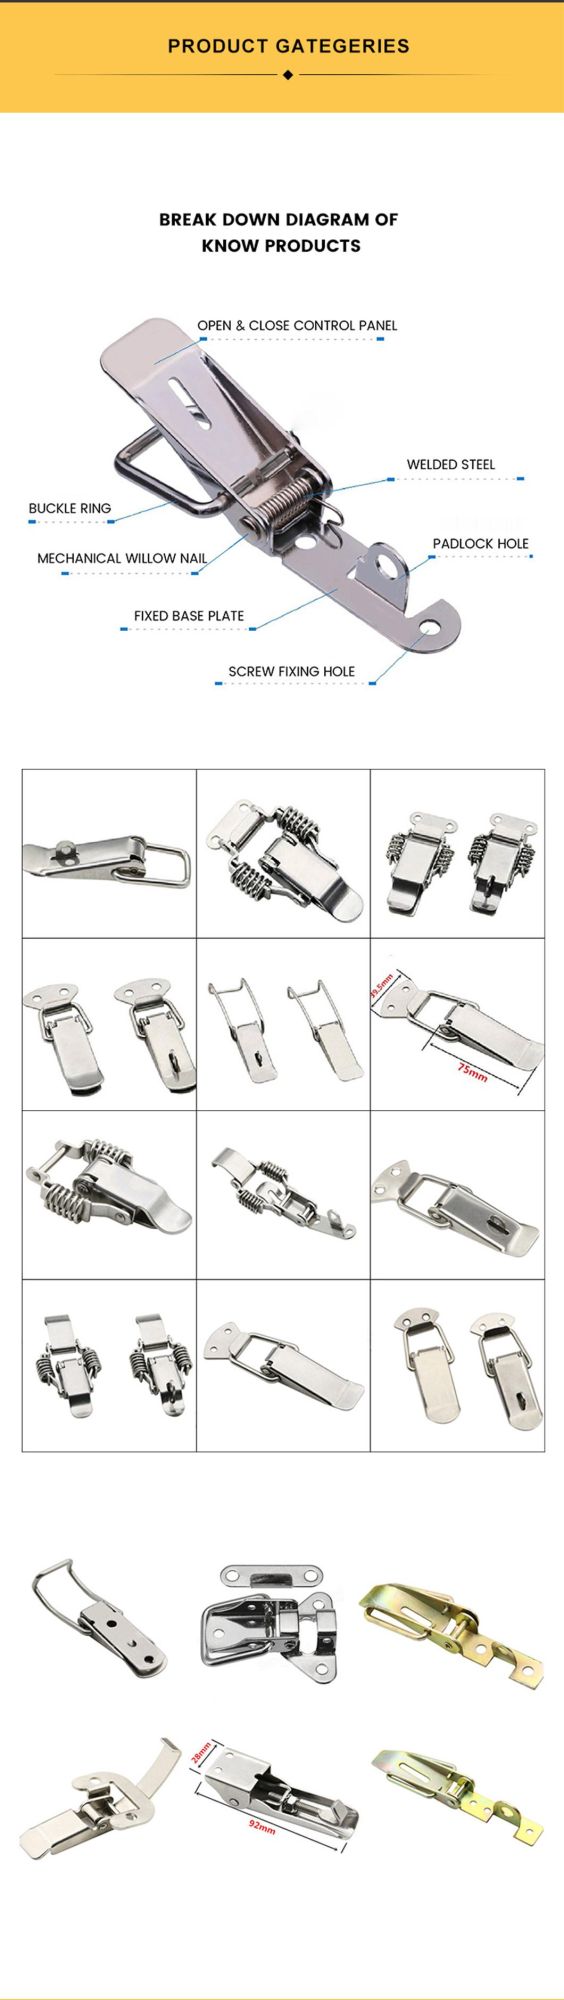 Lock Toggle Latch Marine Style Black Plastic Toggle Clamps with Locking Handle Wholesale Stainless Steel Toggle Latch